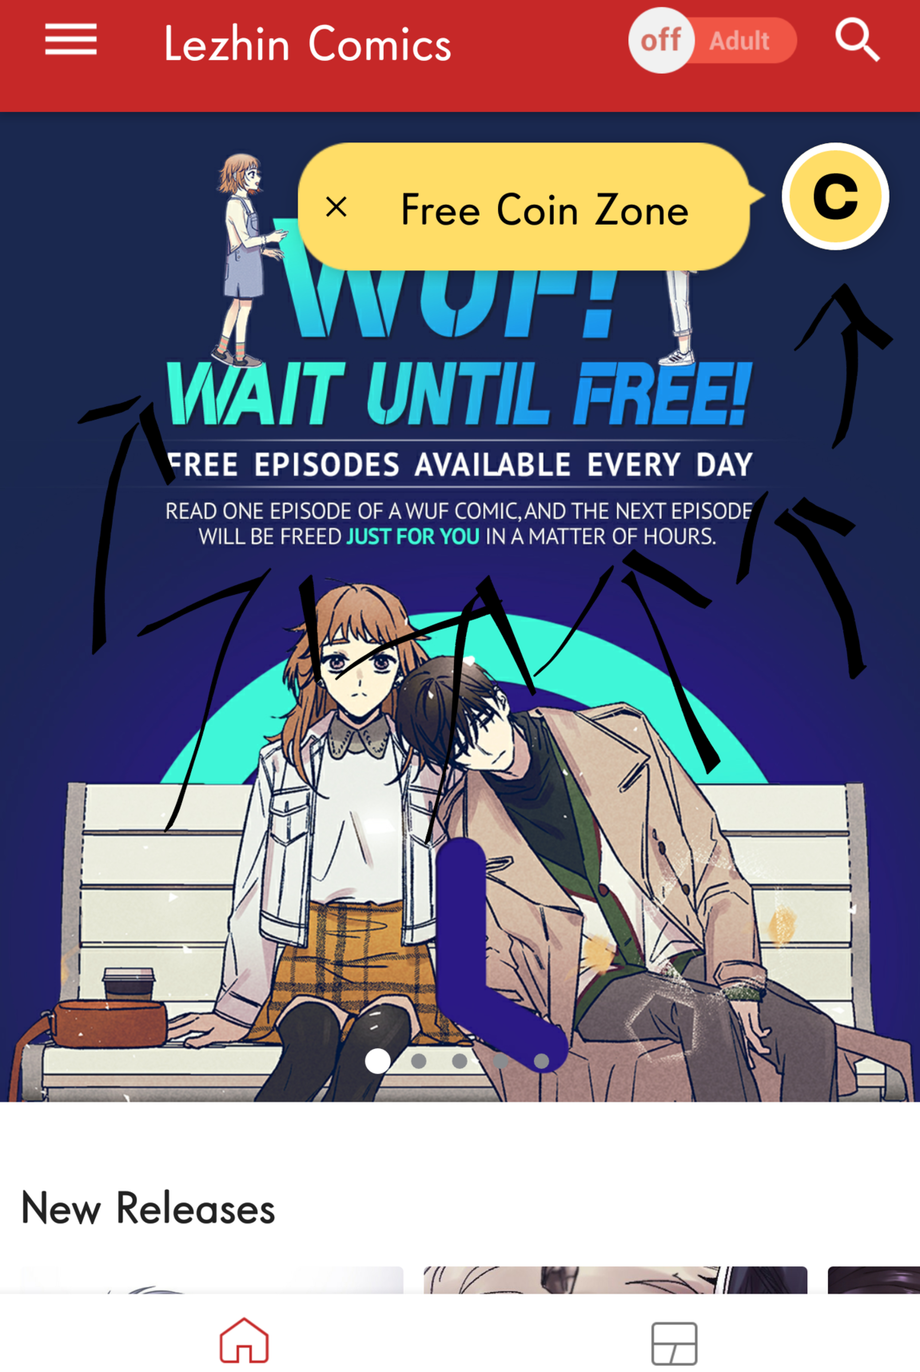 How To Get Free Coins On Lezhin Comics 2018 40+ Pages Summary [800kb